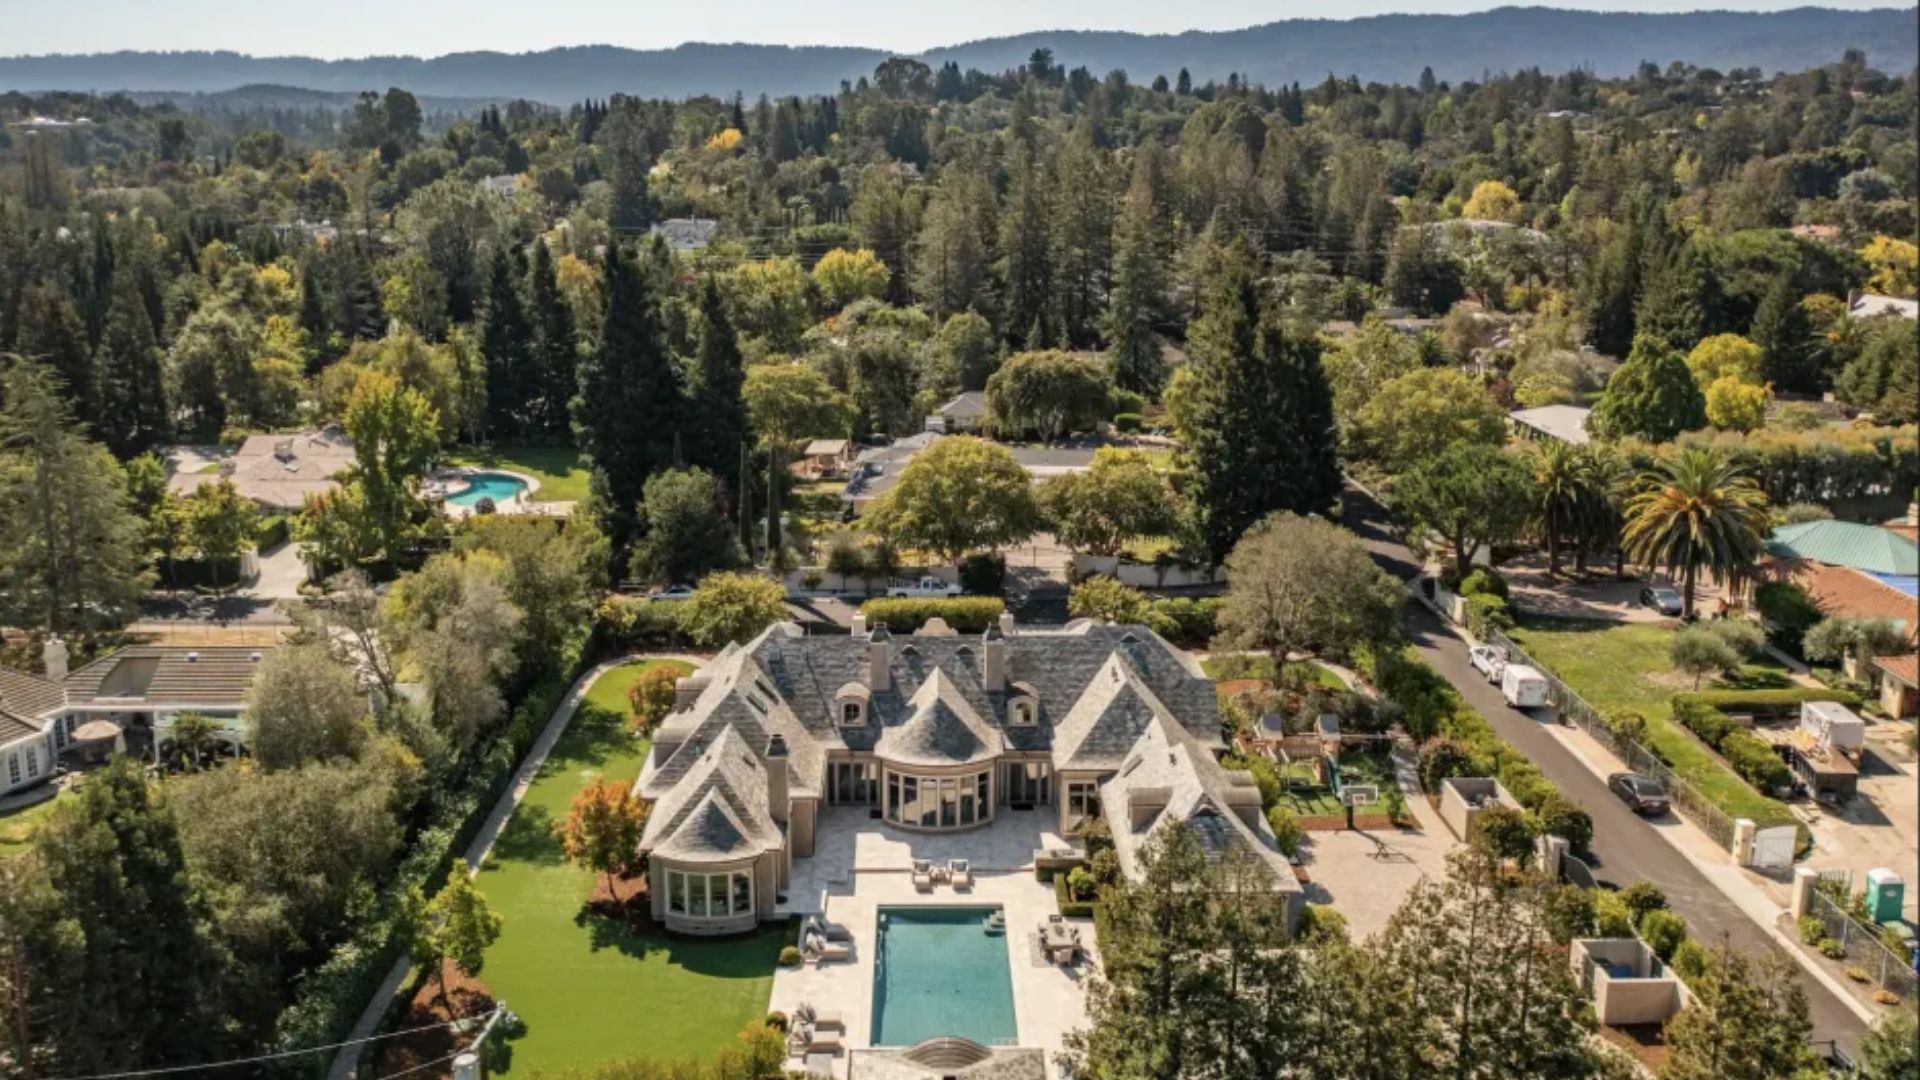 Silicon Valley luxury home market heats up amid AI boom